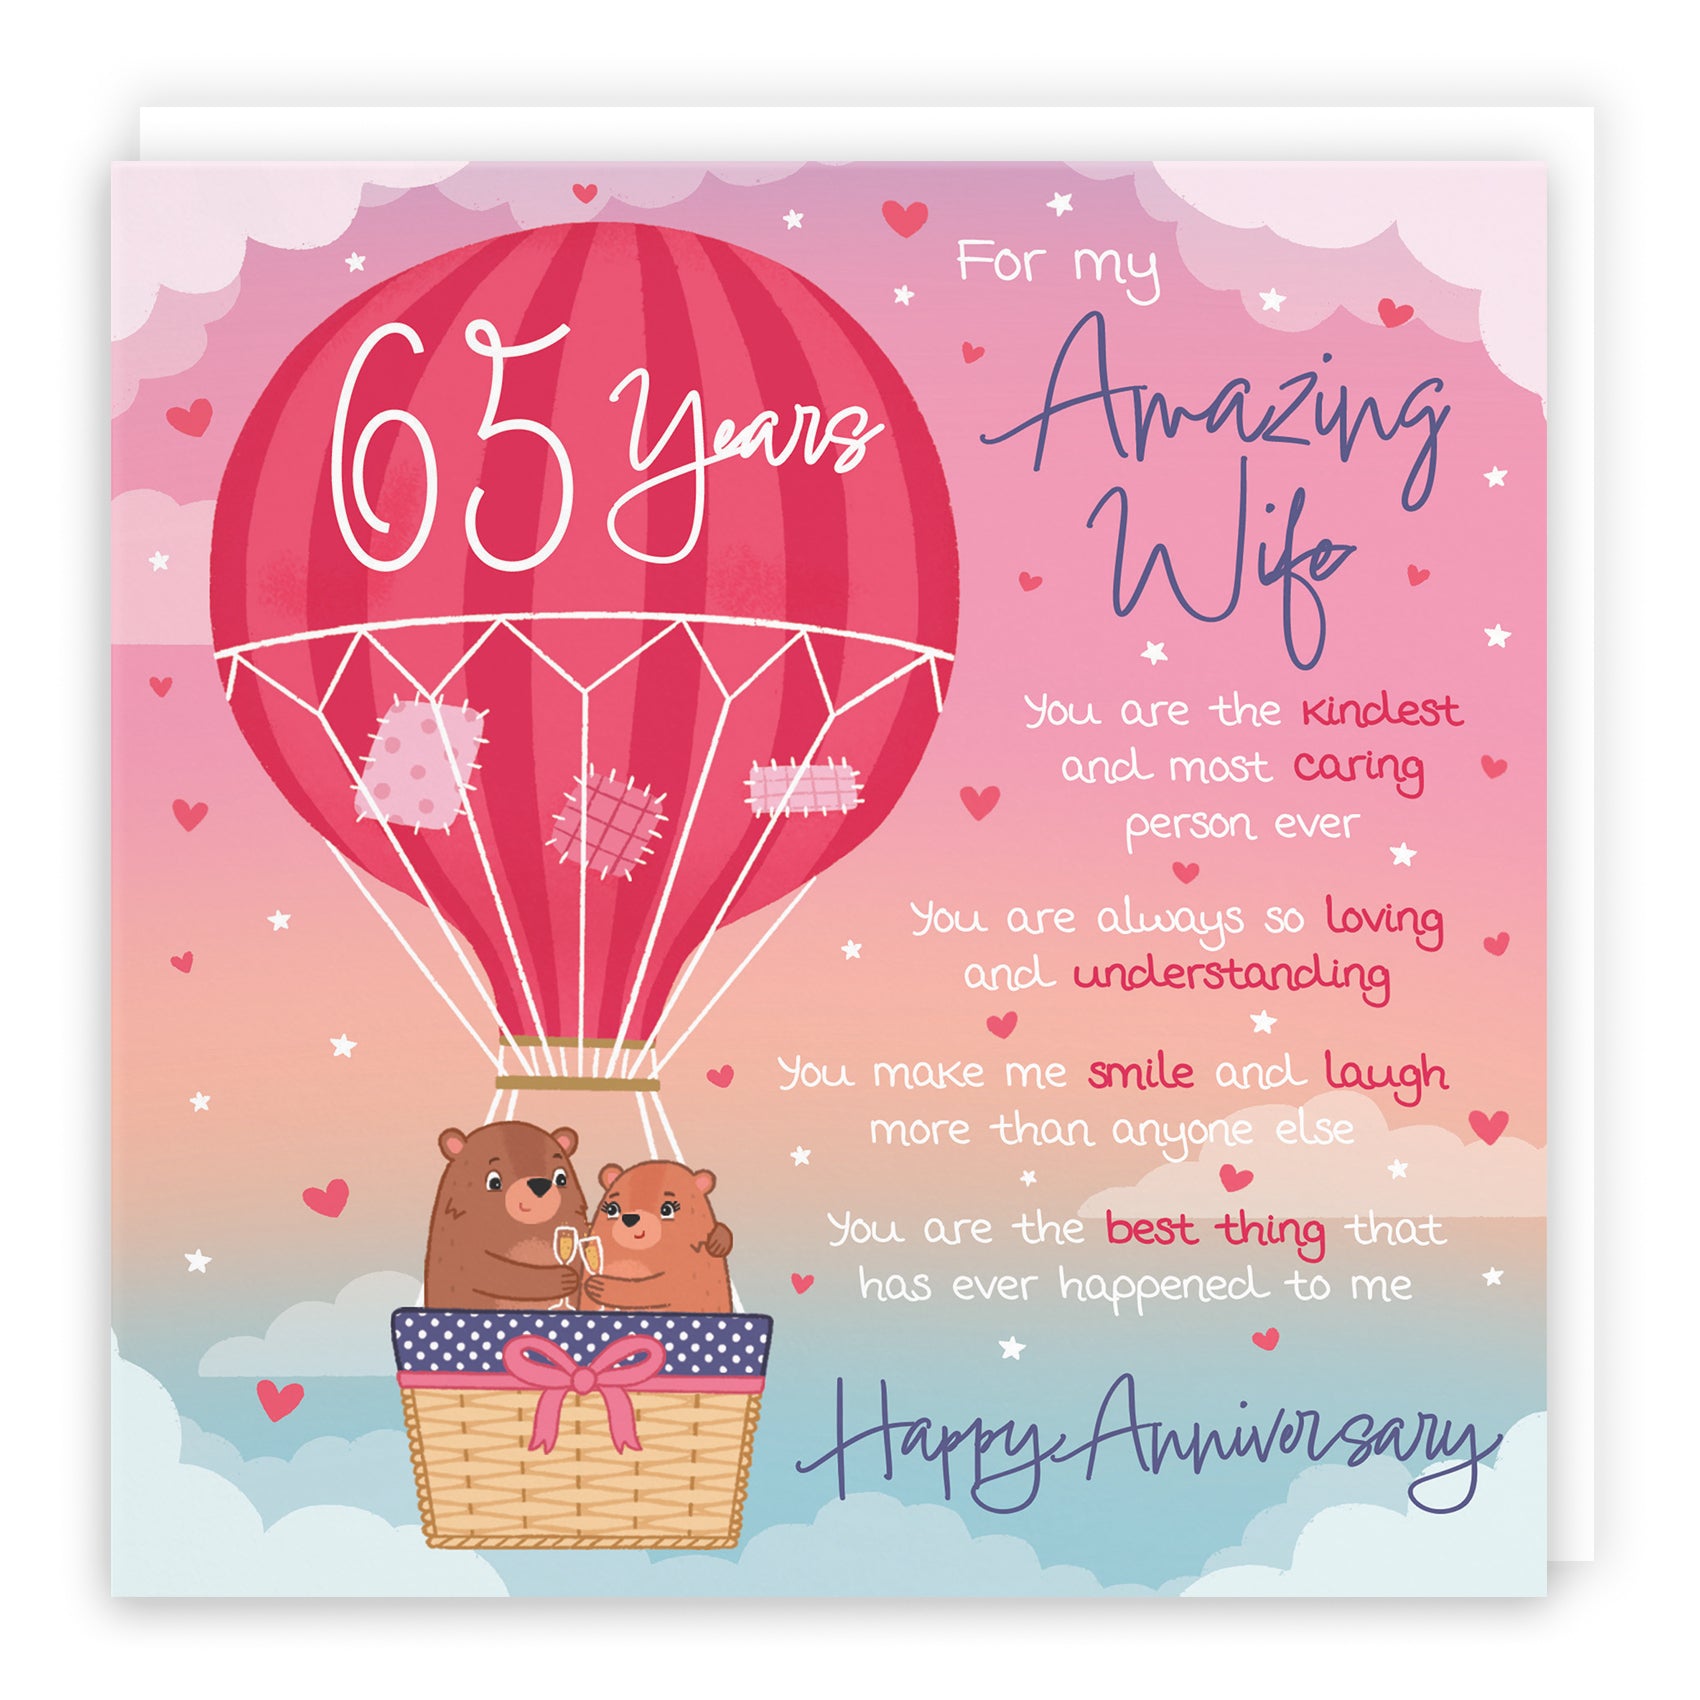 Wife 65th Anniversary Poem Card Love Is In The Air Cute Bears